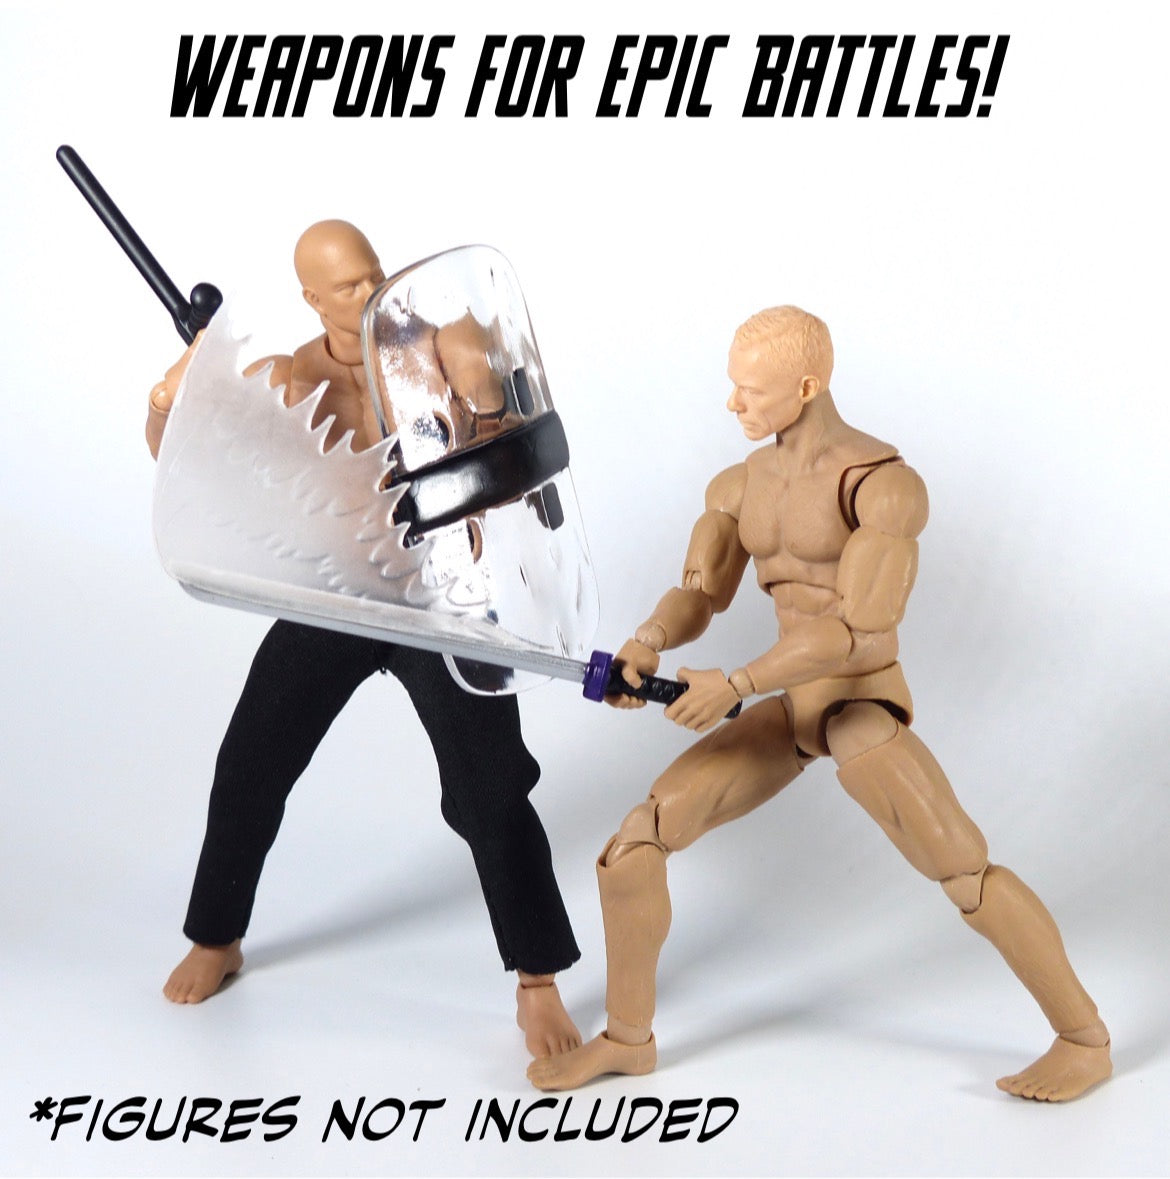 Super Action Stuff!! Fire Power Action Figure Accessories – Yummy